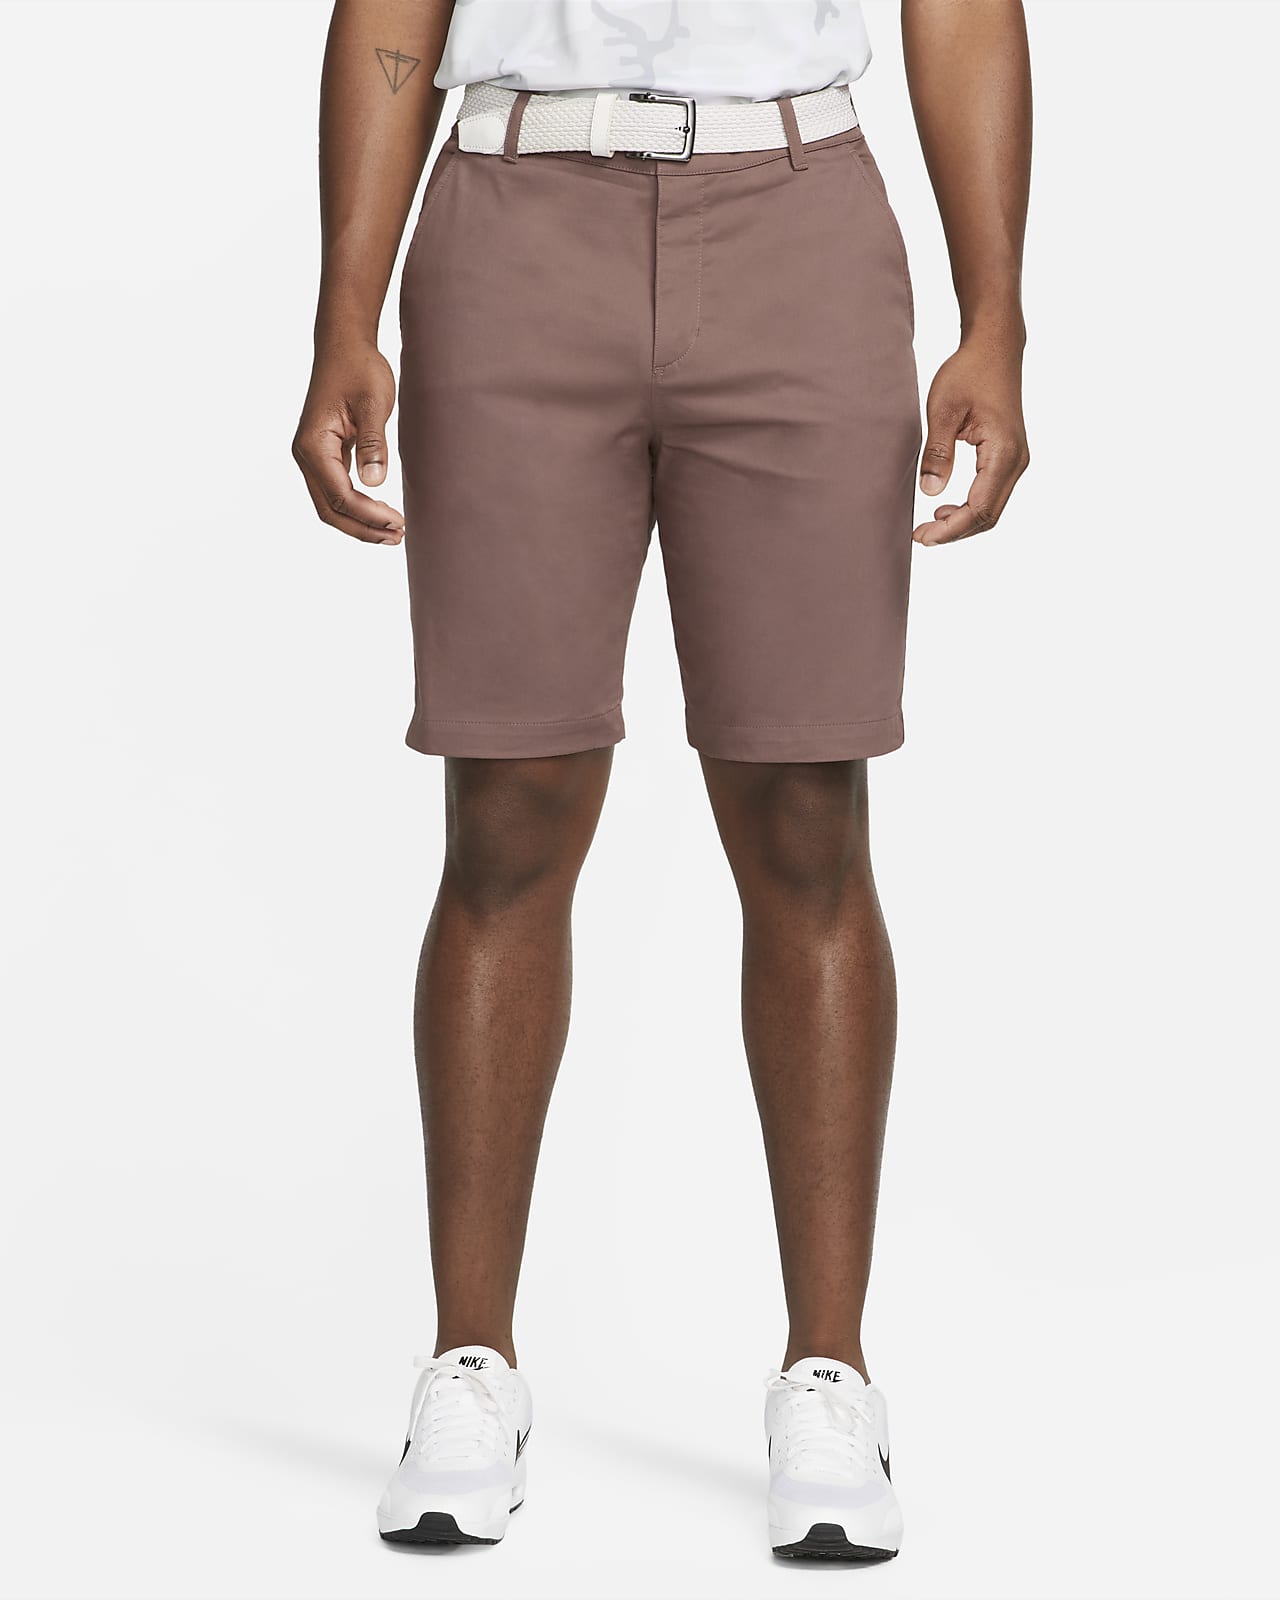 LINKS EDITION Performance Golf Appeal Mens Golf Shorts - Silver Lining  Beige 44